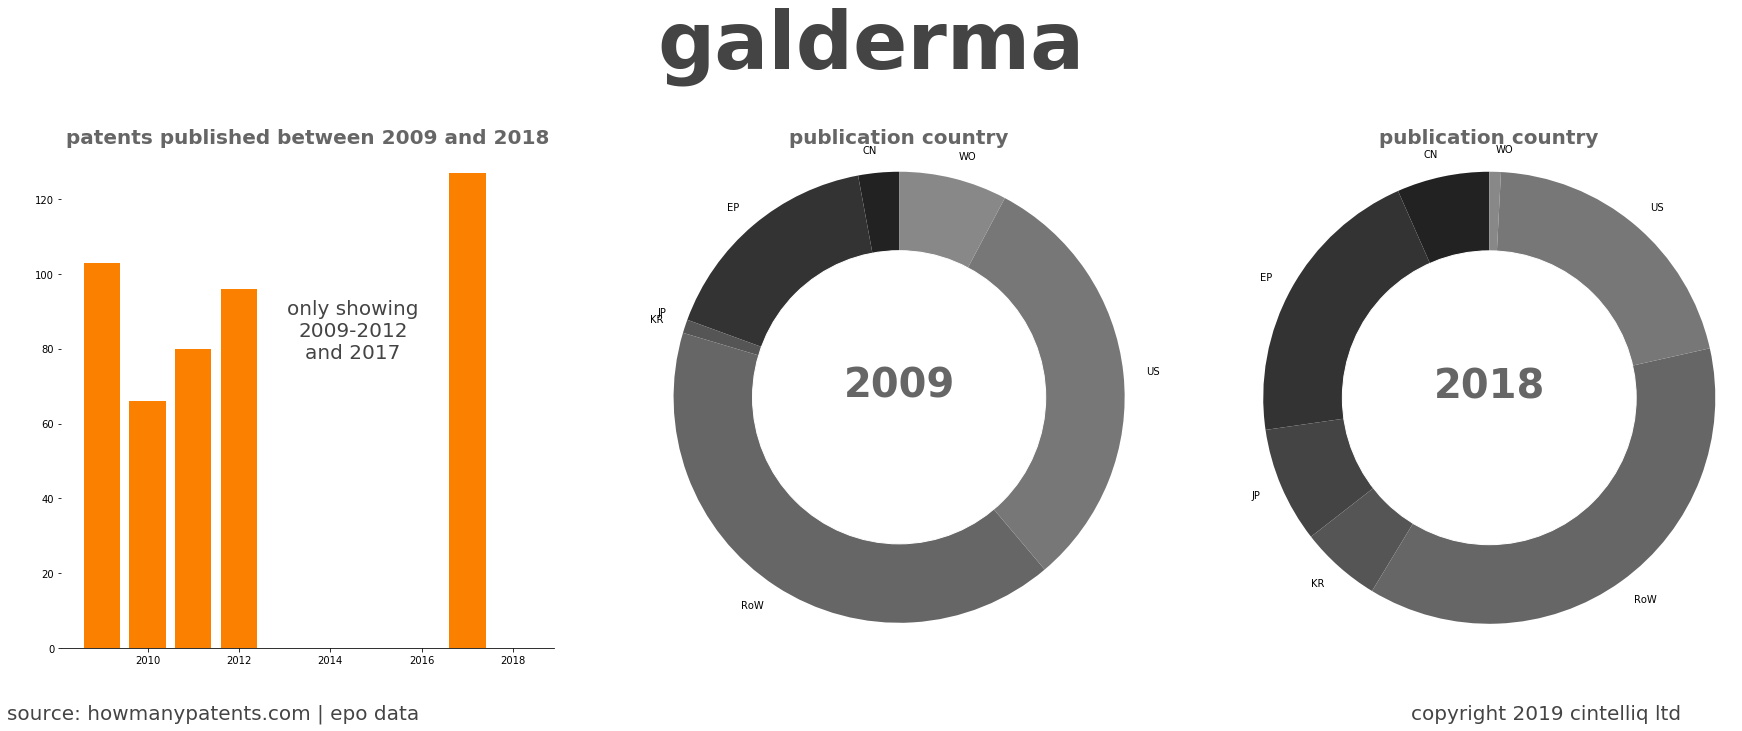 summary of patents for Galderma